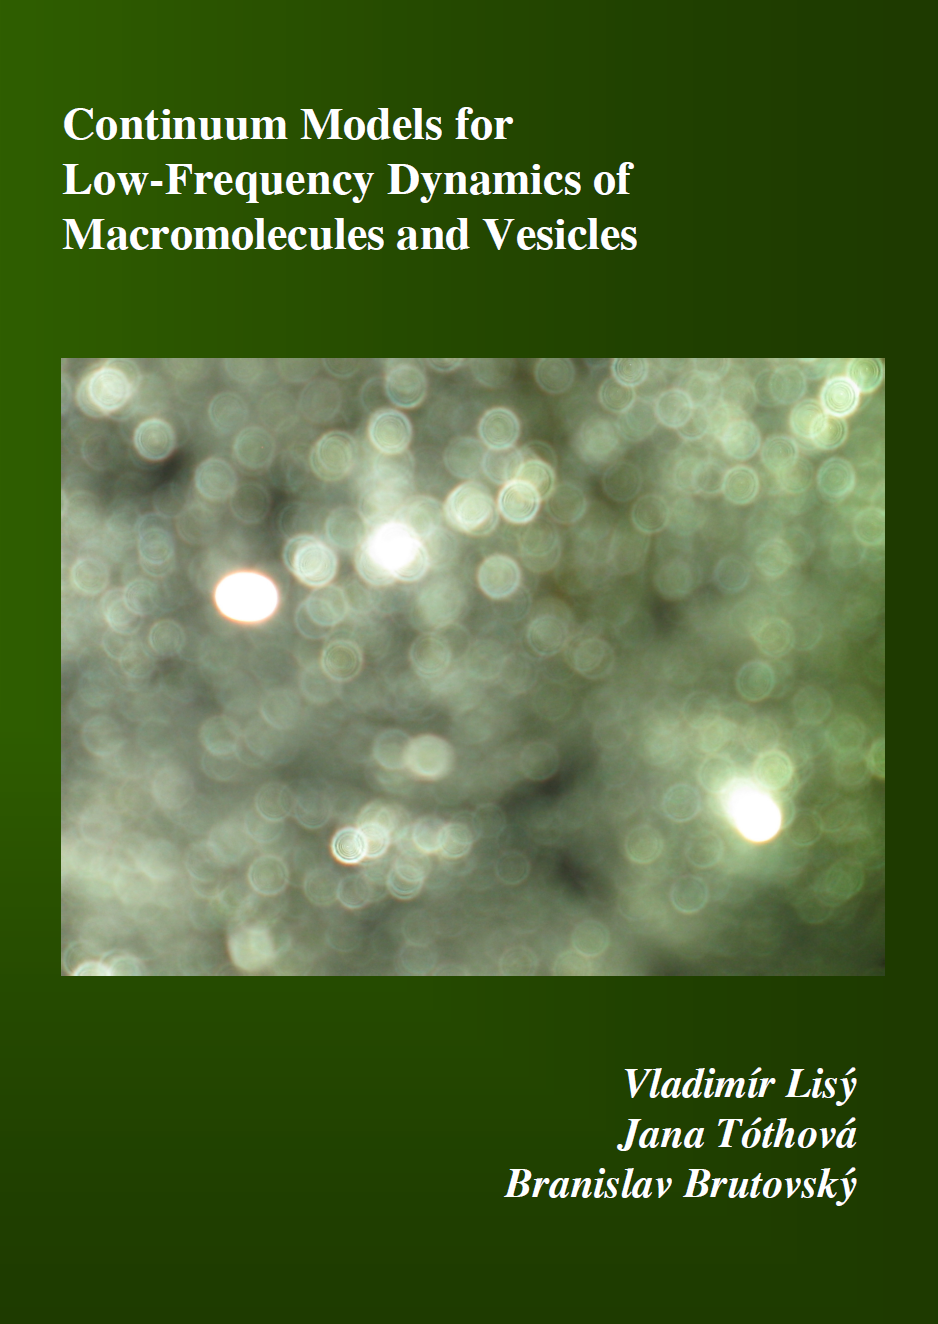 Continuum Models for Low-Frequency Dynamics of Macromolecules and Vesicles